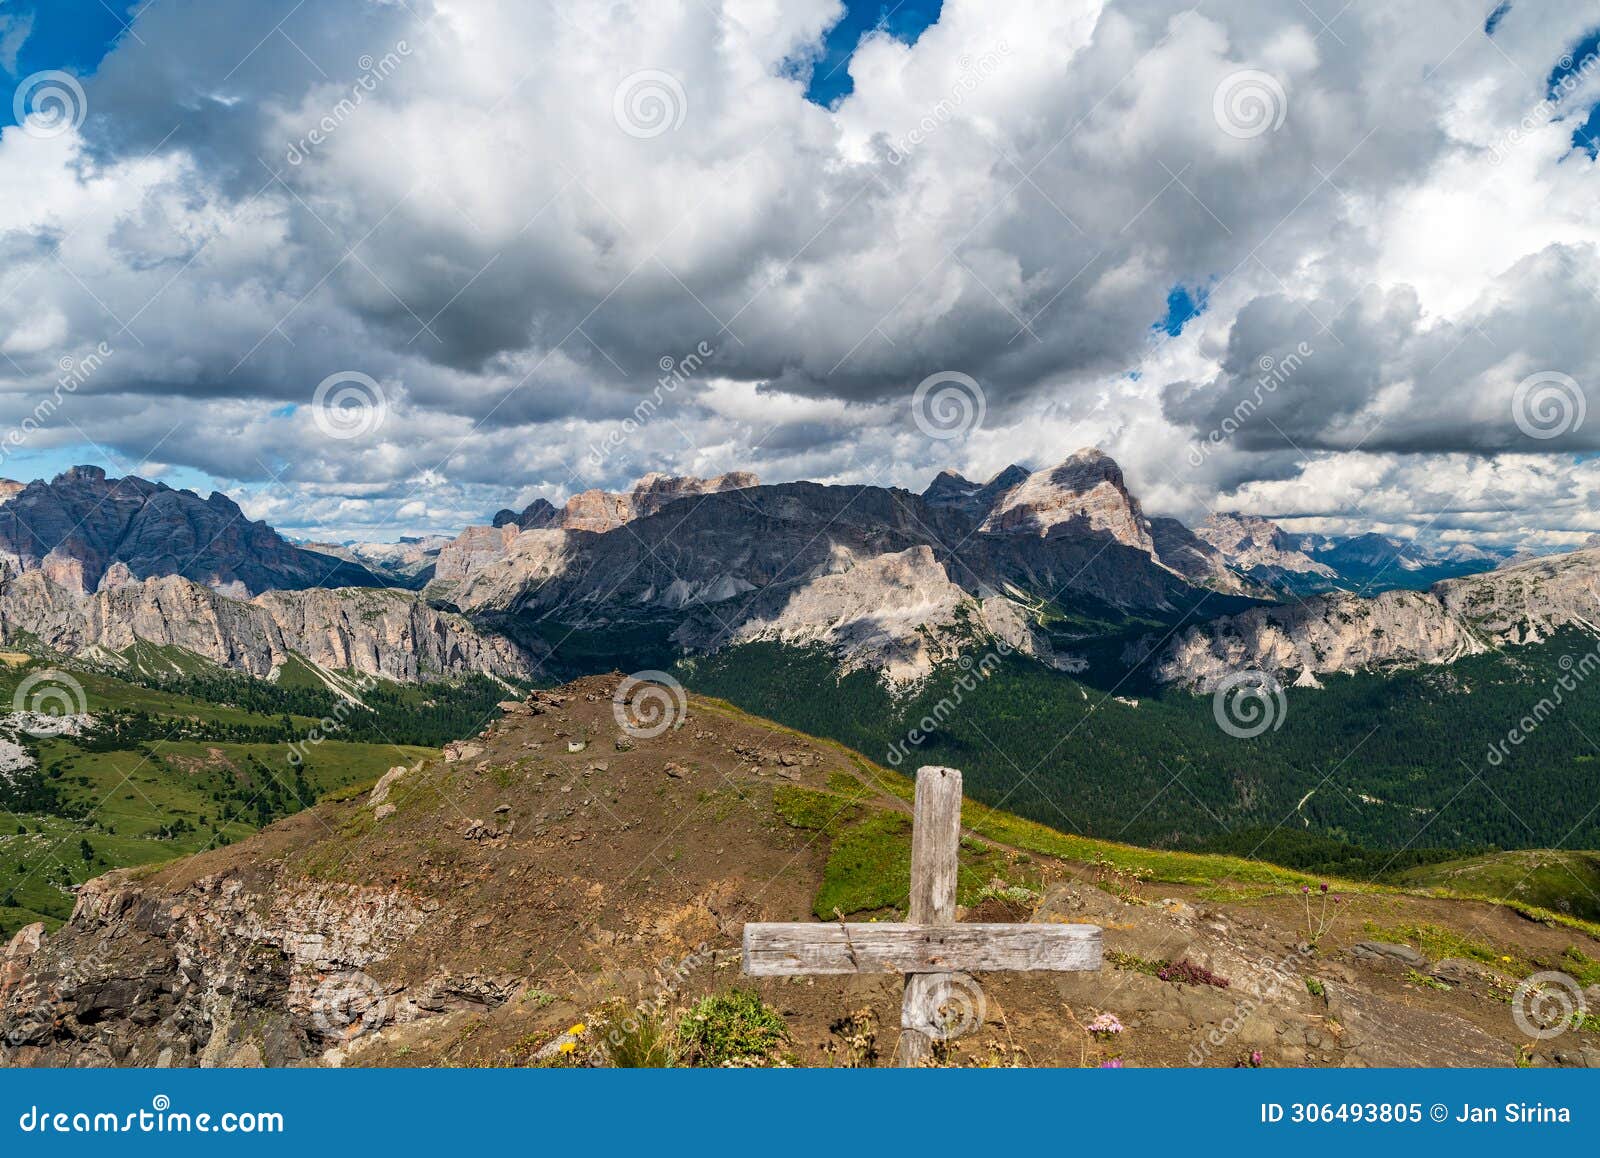 fanes, tofana and many other mountain peaks from col di lana mountain peak in the dolomites